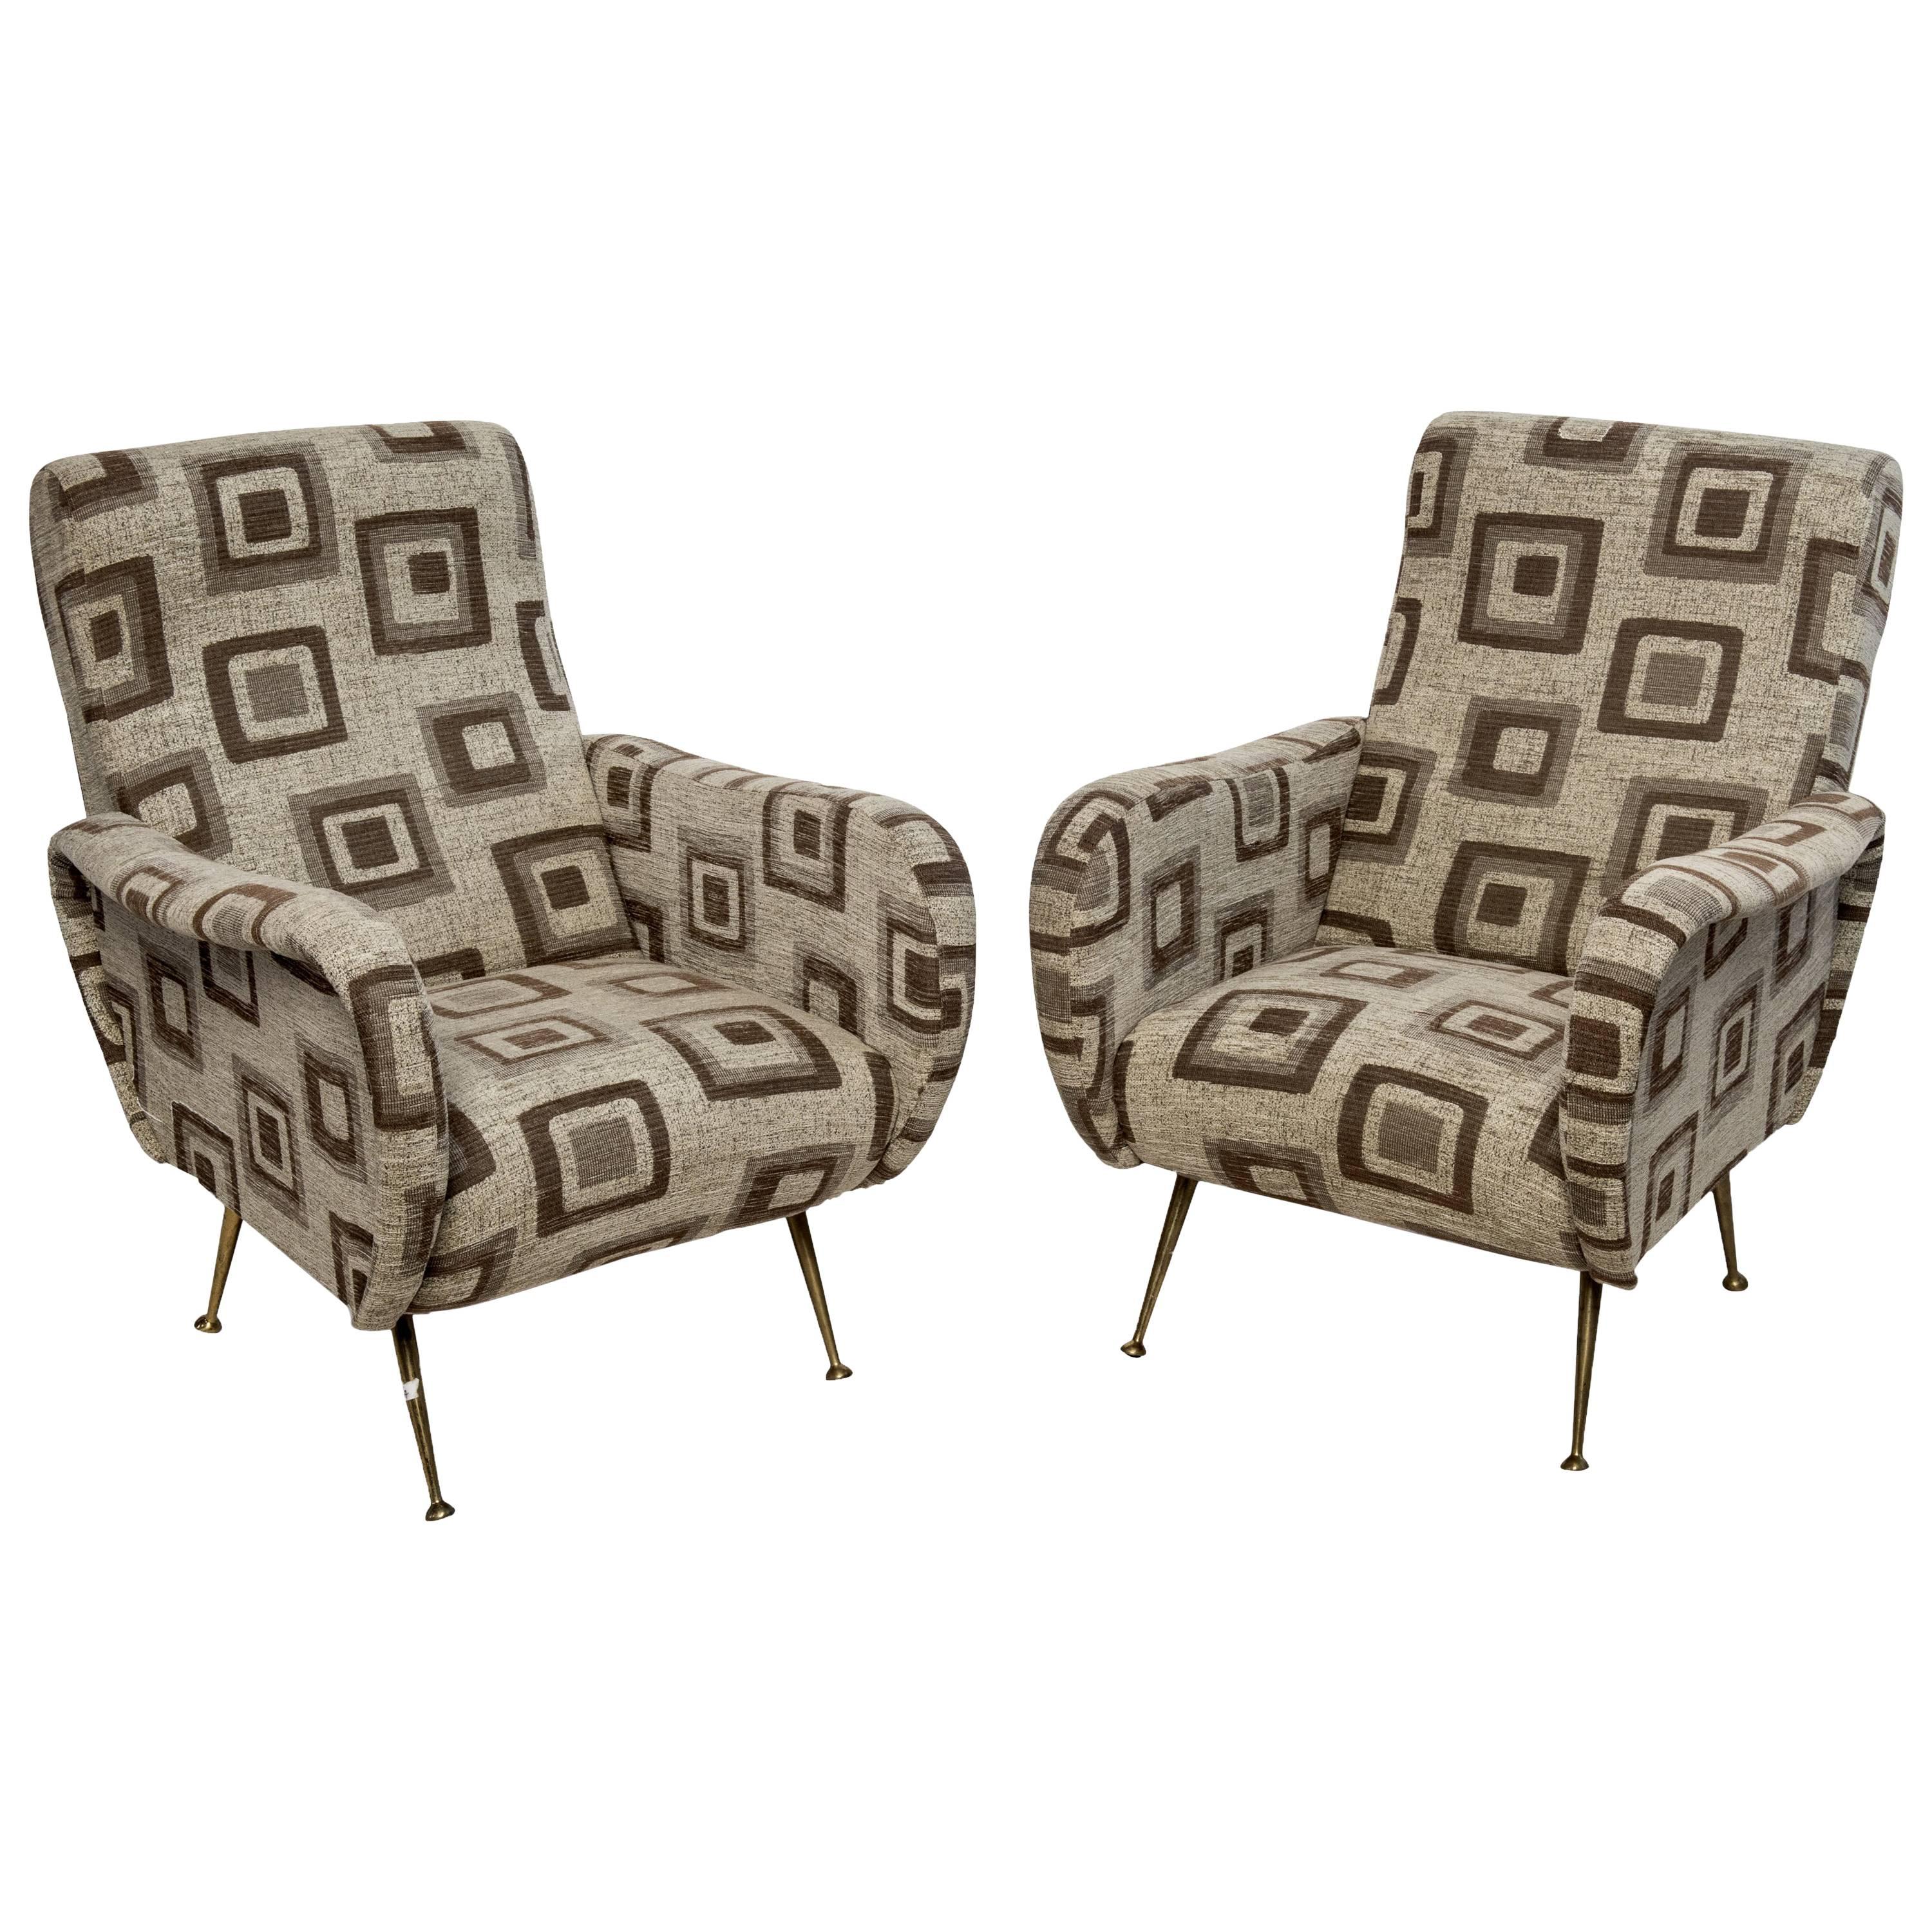 Pair of Italian Fauteuils For Sale